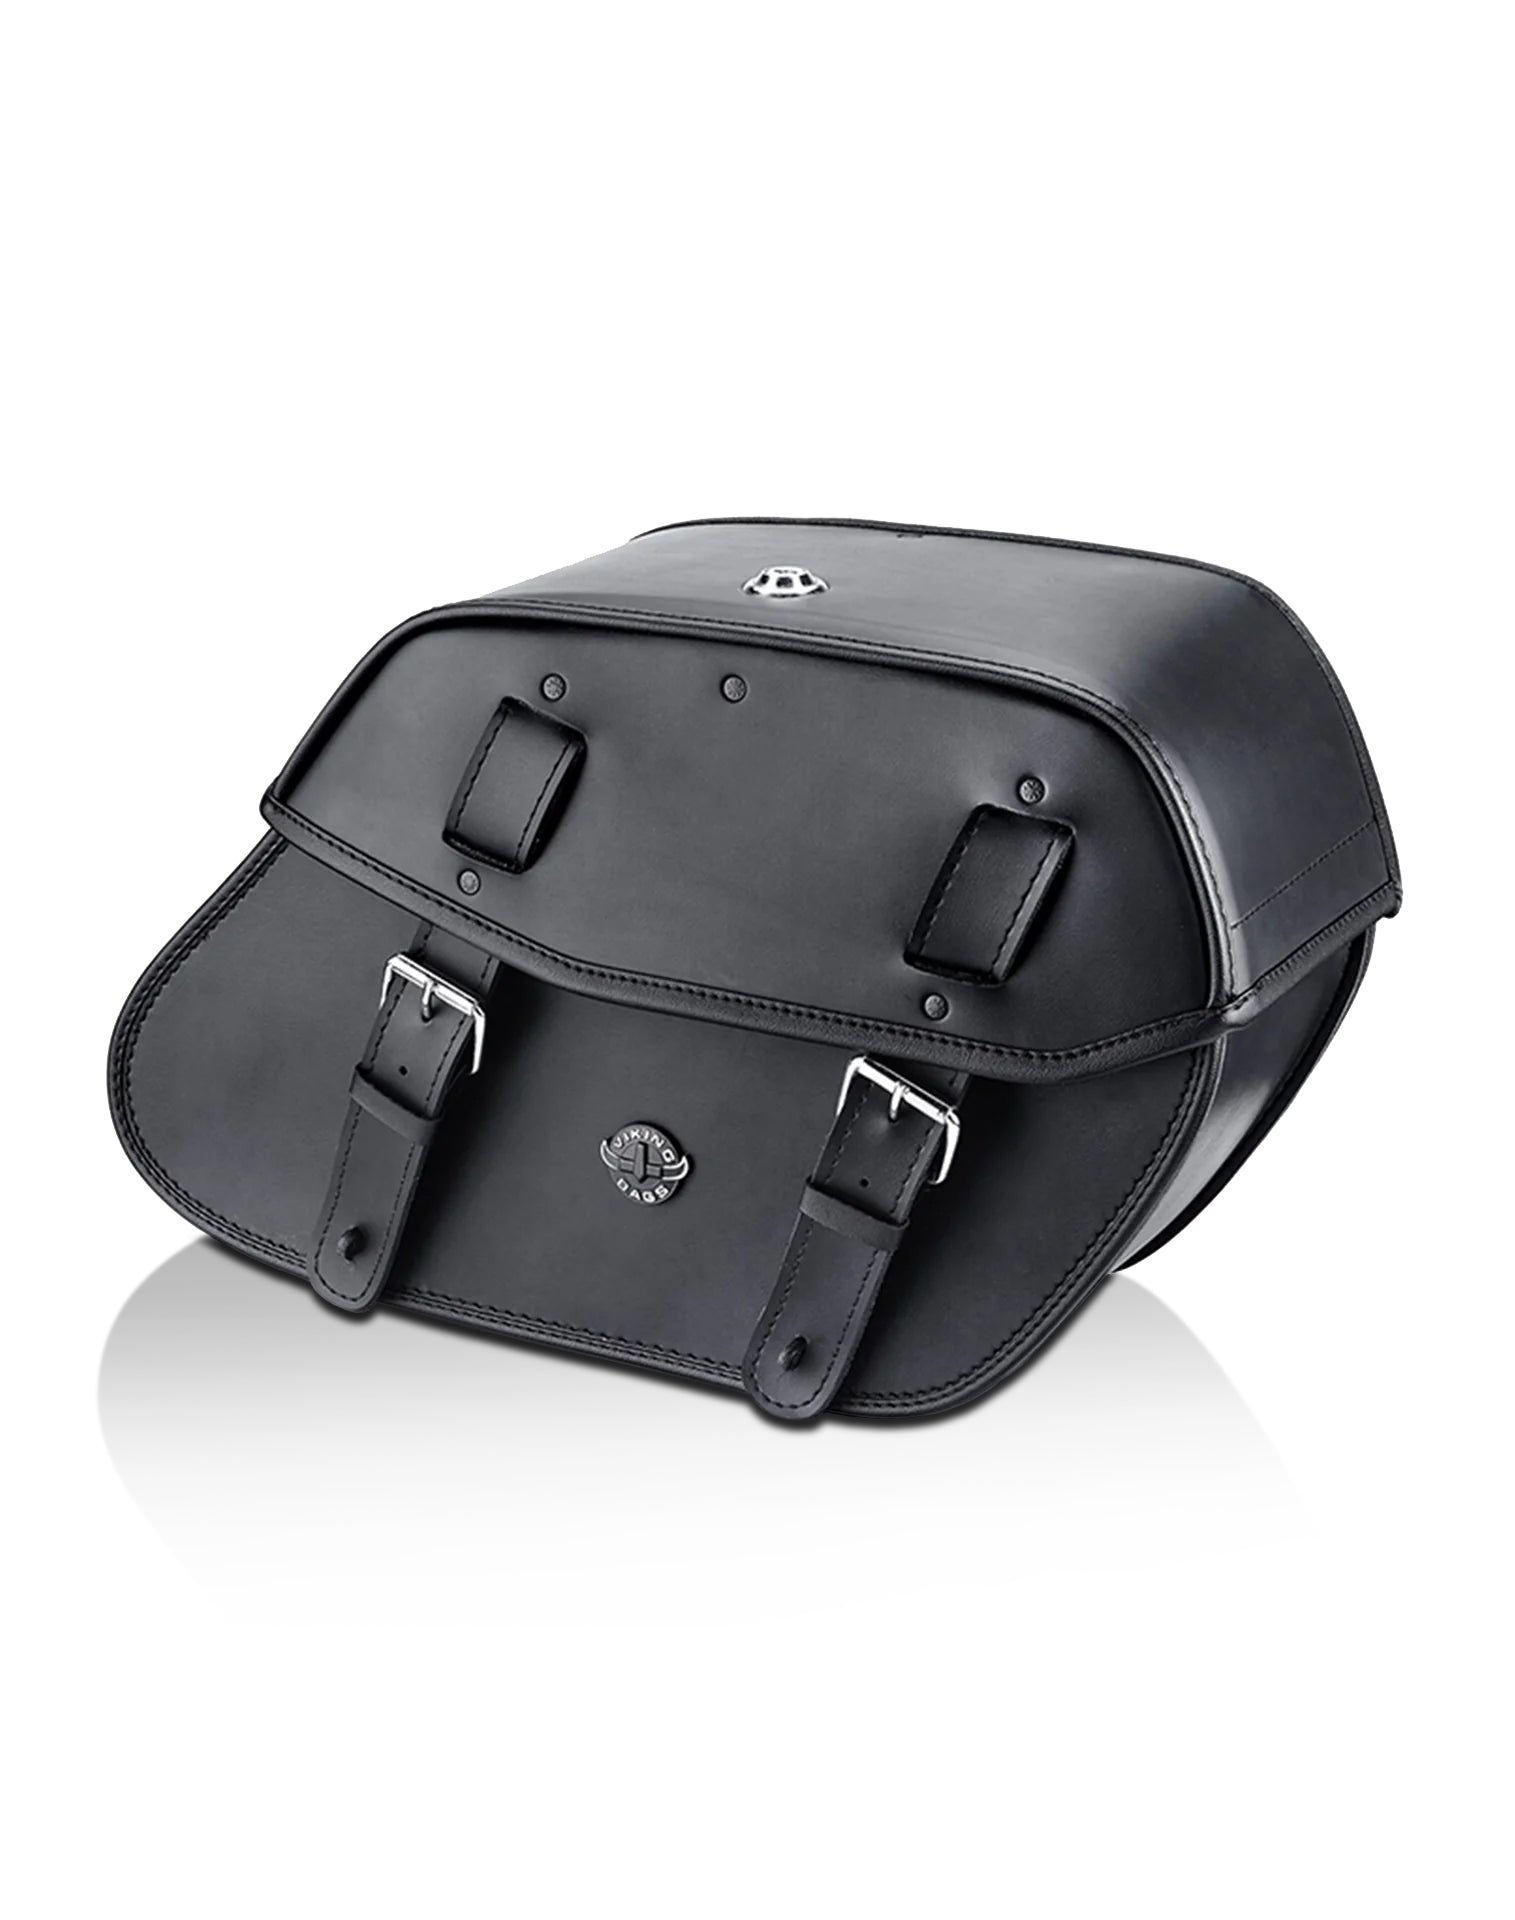 Viking Odin Large Leather Motorcycle Saddlebags For Harley Softail Custom Fxstc Main View